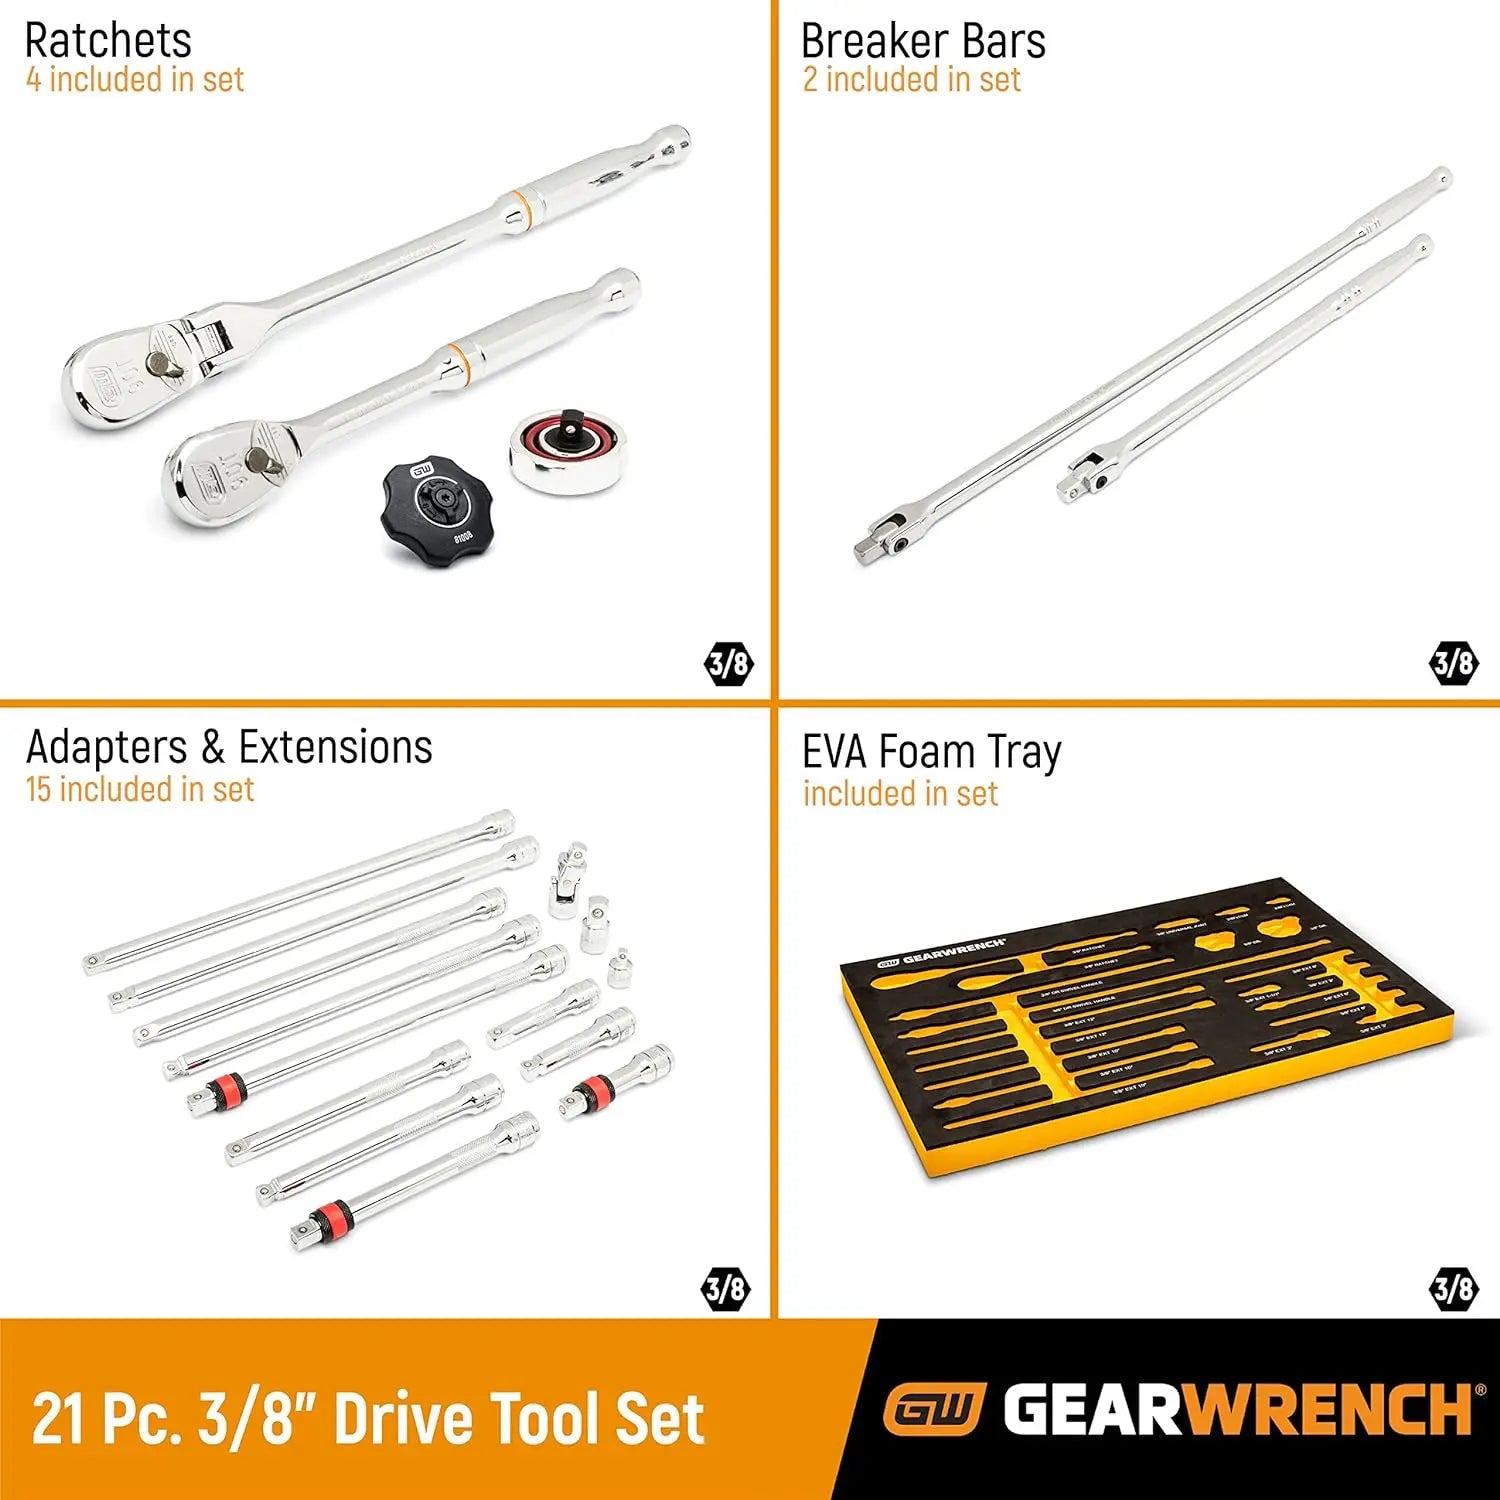 GEARWRENCH 21 Piece 3/8" 90T Ratchet & Drive Tool Set with EVA Foam Tray - 86521